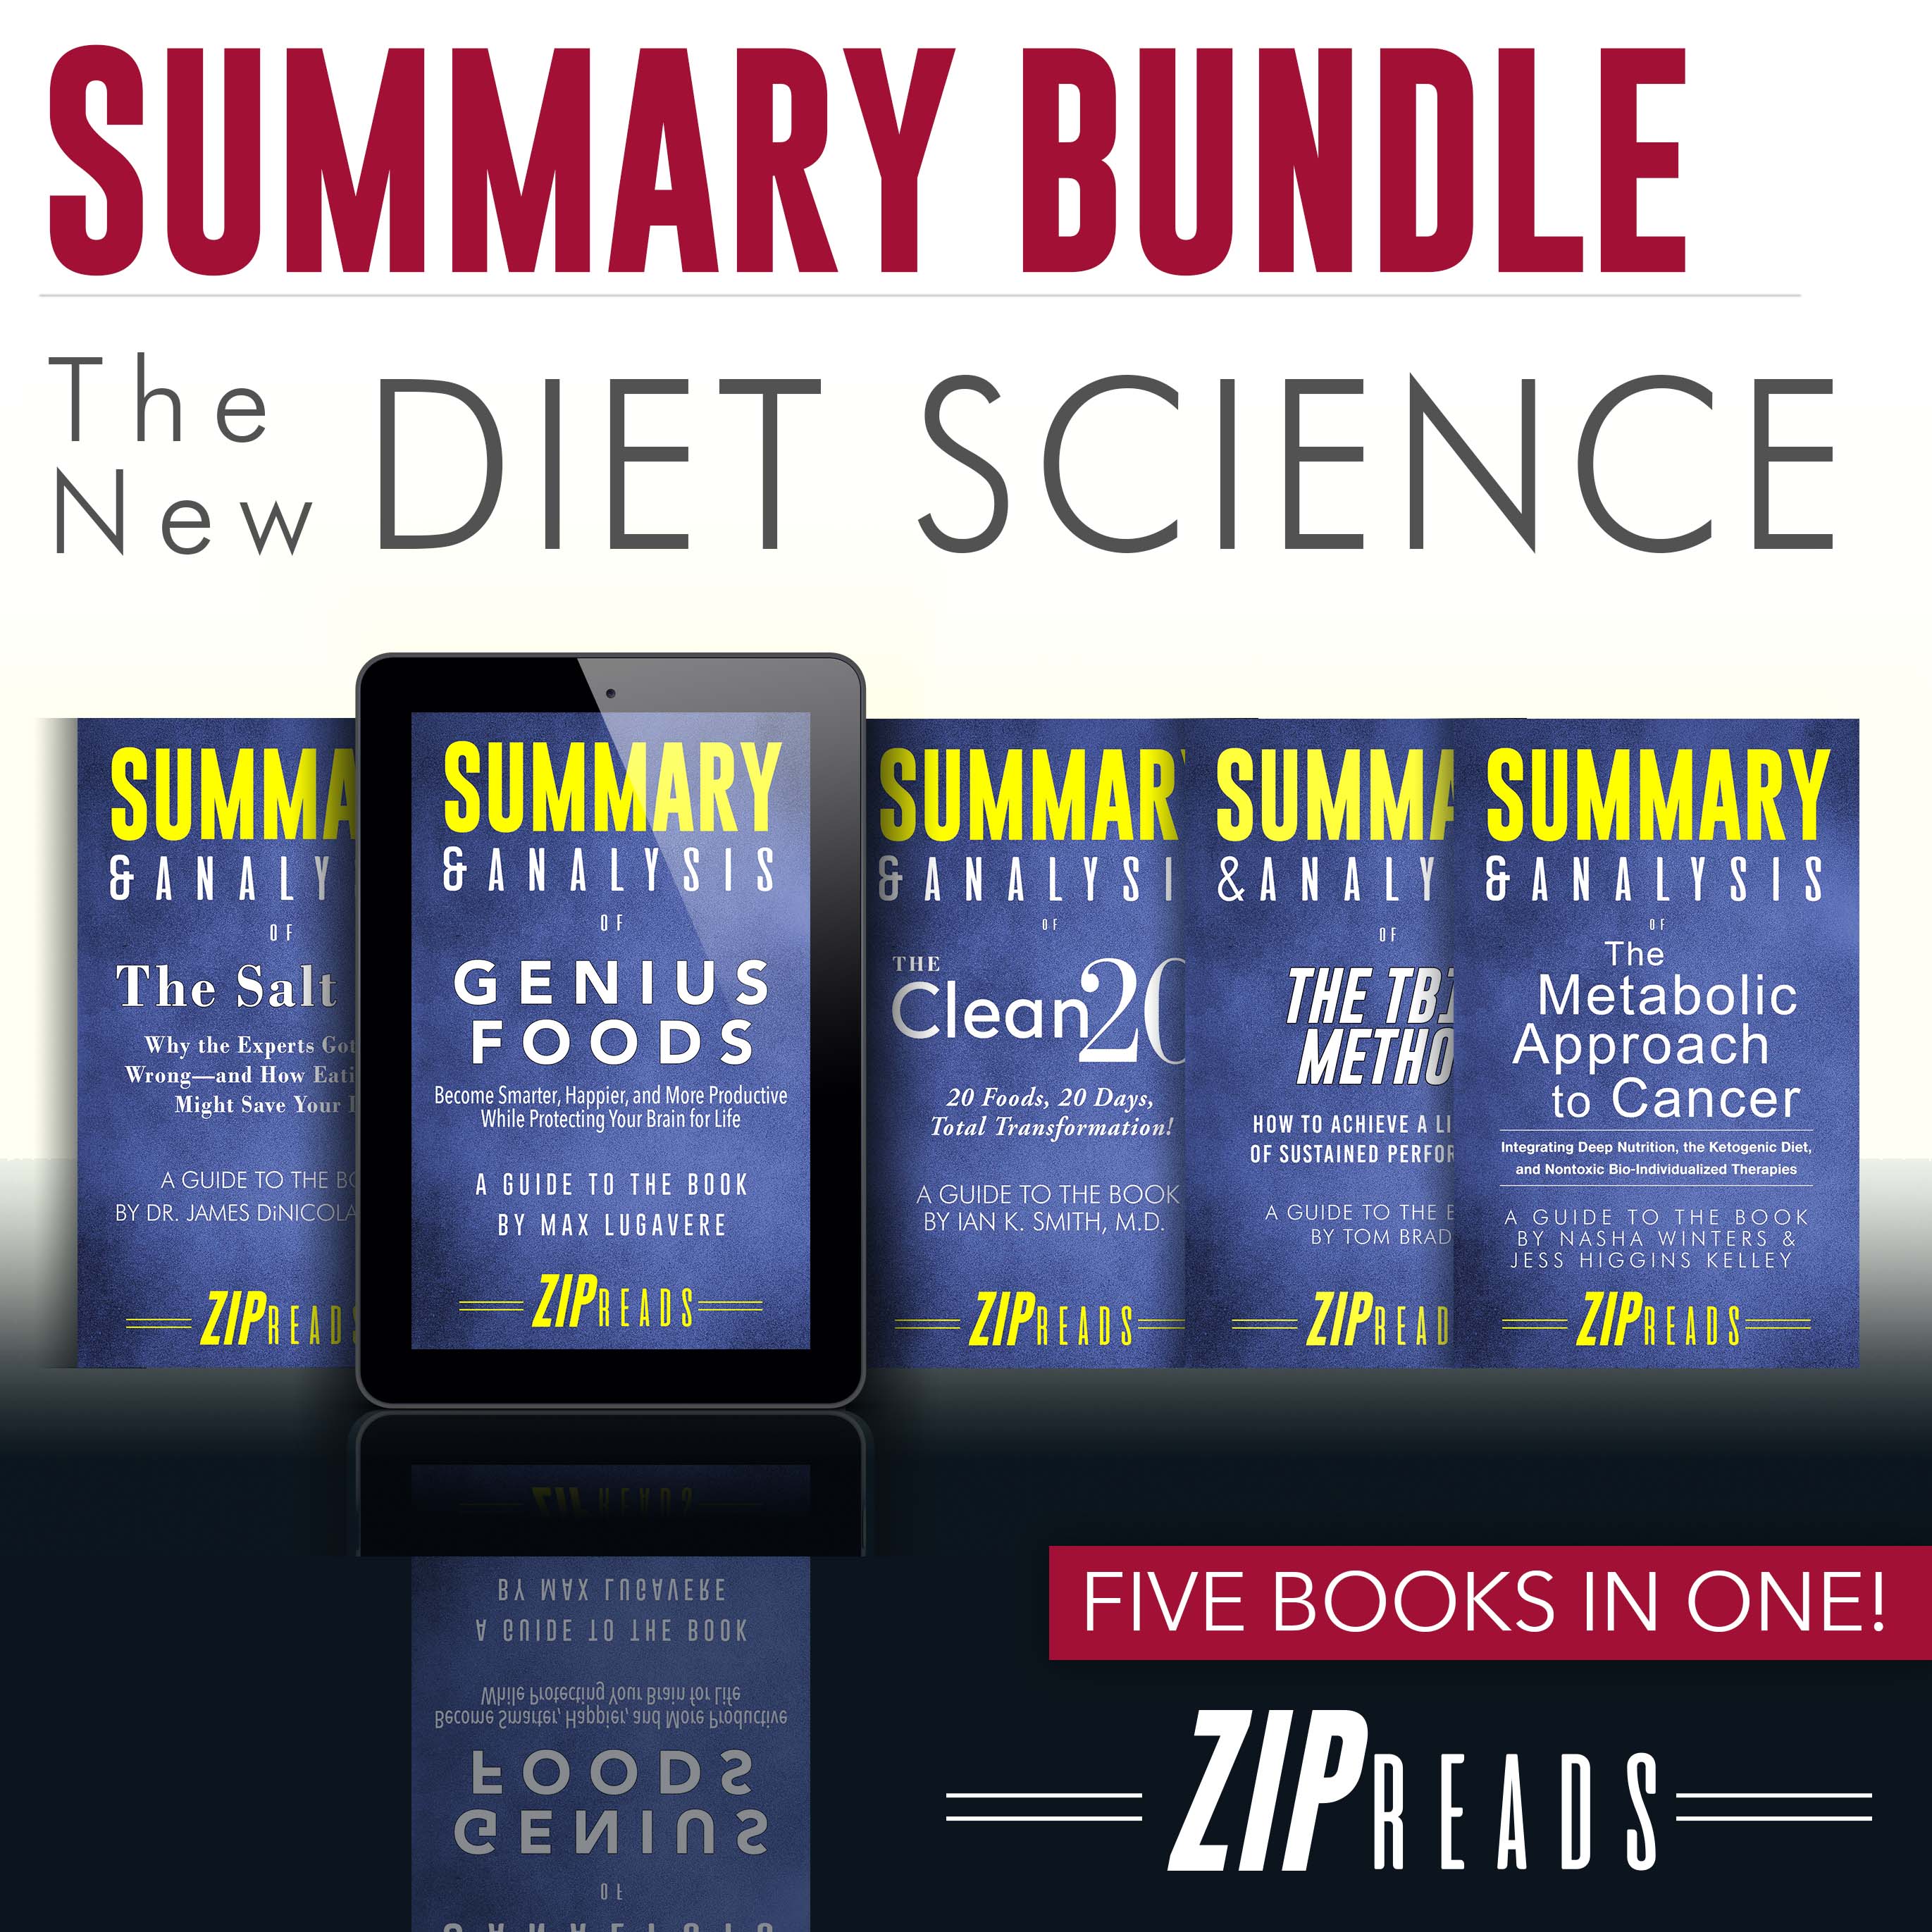 Summary Bundle The New Diet Science